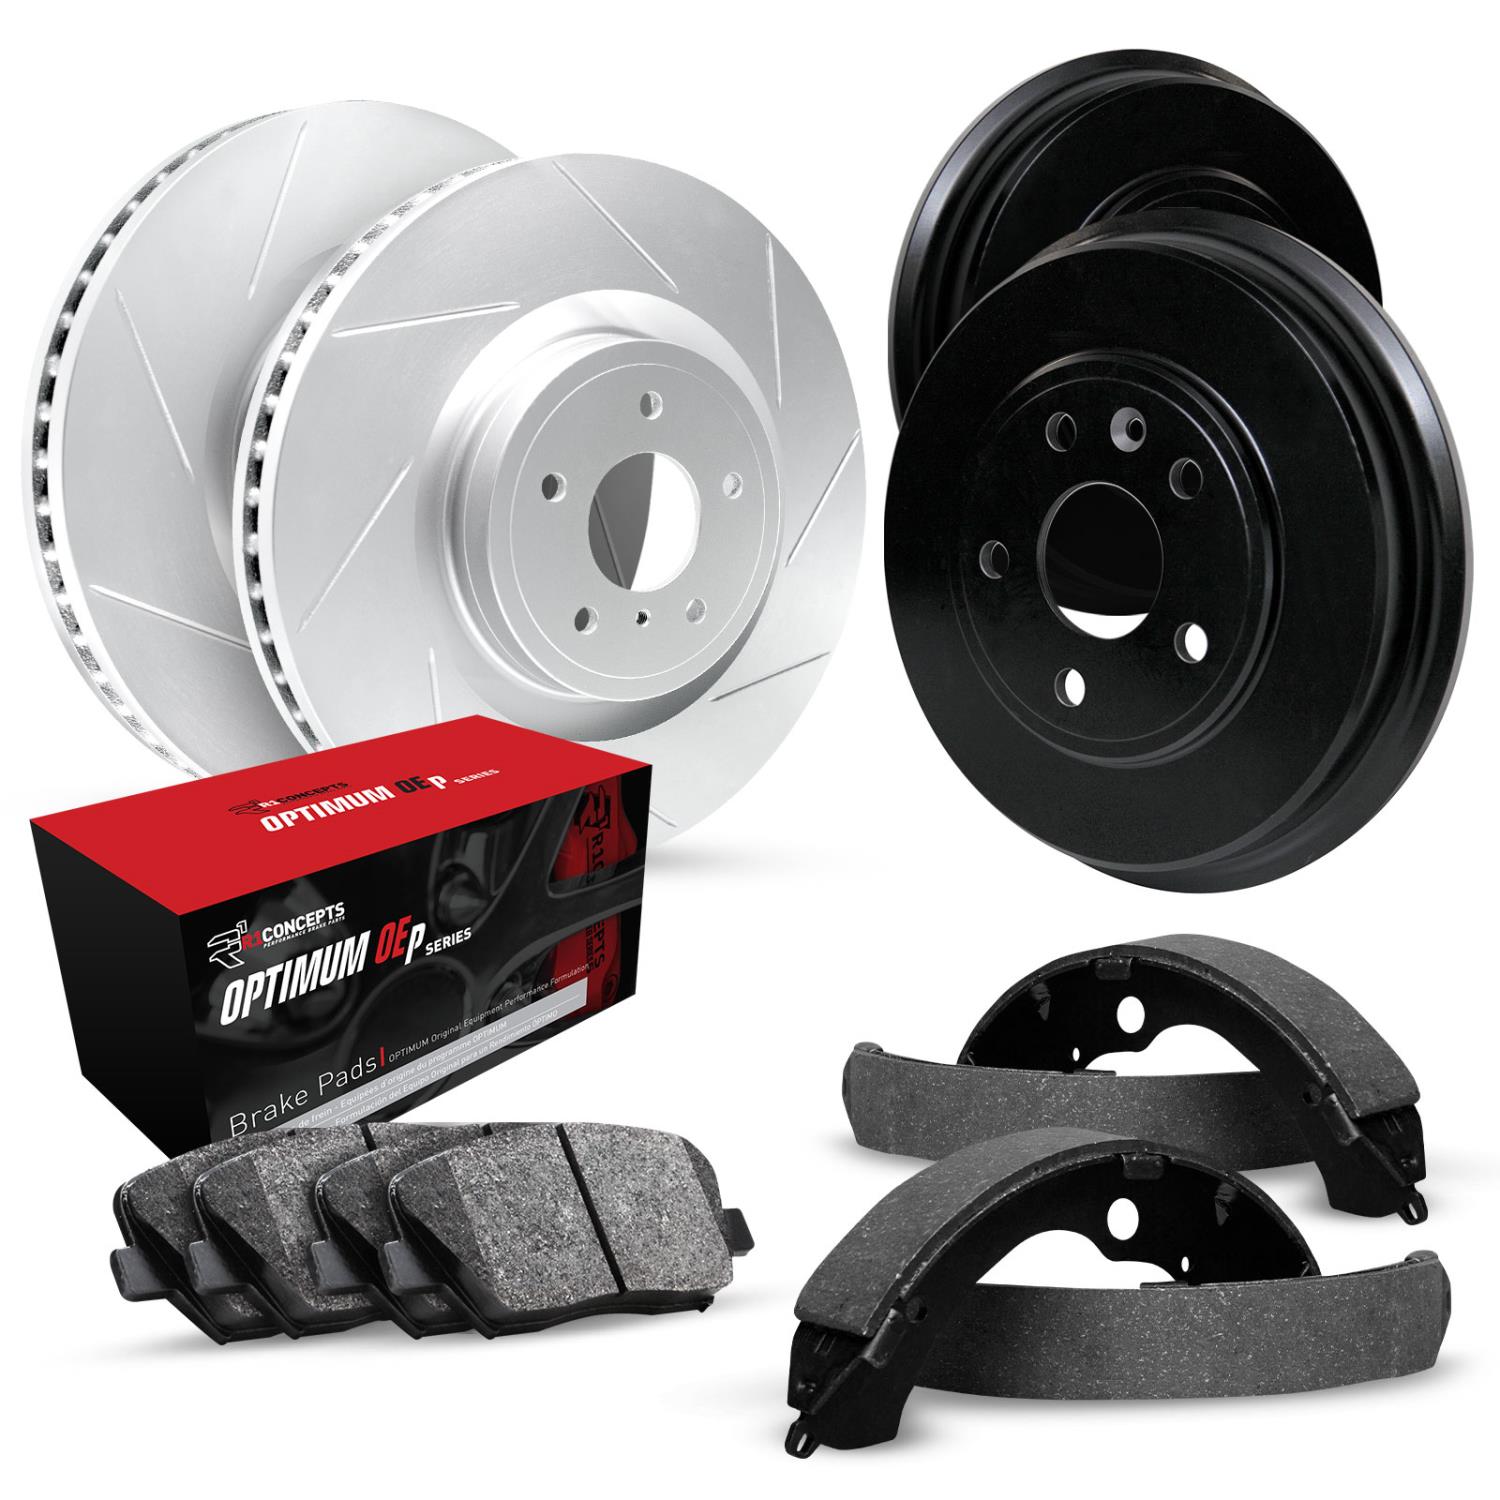 GEO-Carbon Slotted Brake Rotor & Drum Set w/Optimum OE Pads & Shoes, 2014-2018 Lexus/Toyota/Scion, Position: Front & Rear